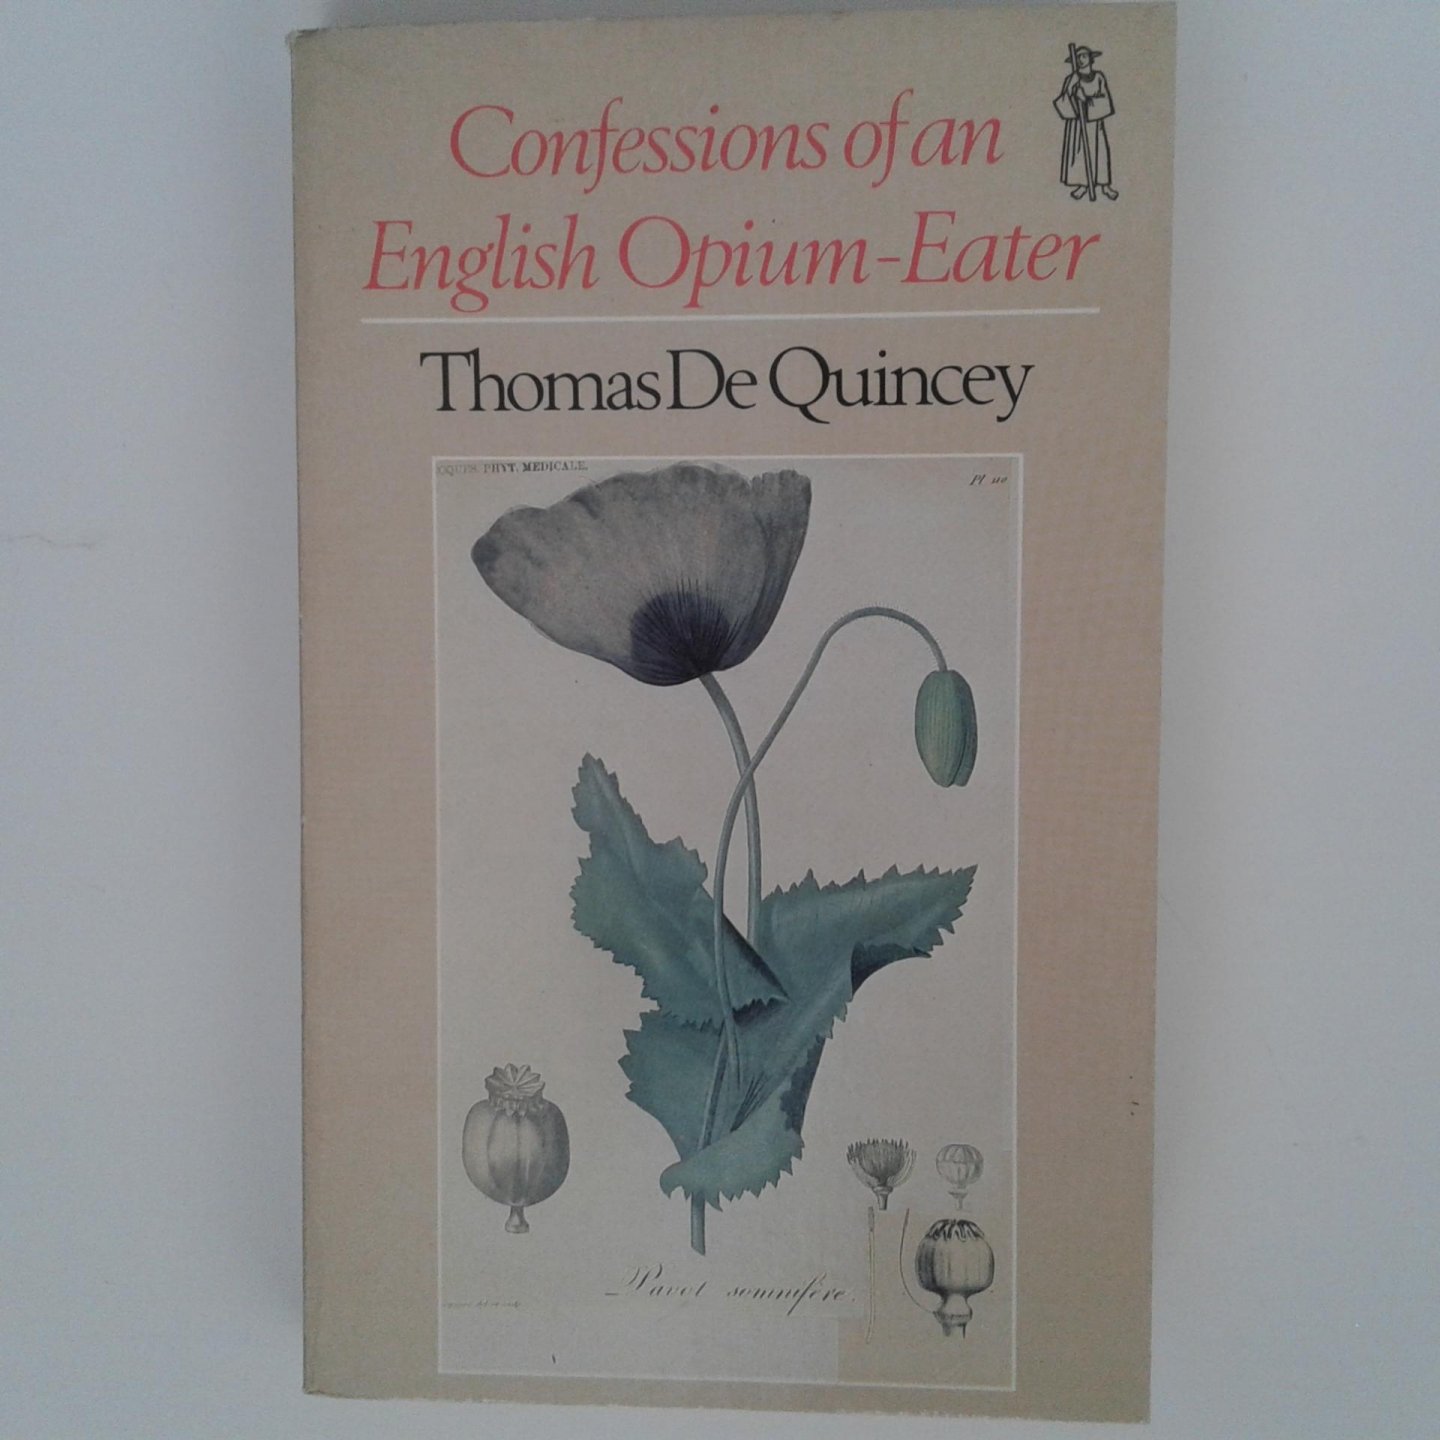 Quincey, Thomas De - Confessions of an English Opium-Eater